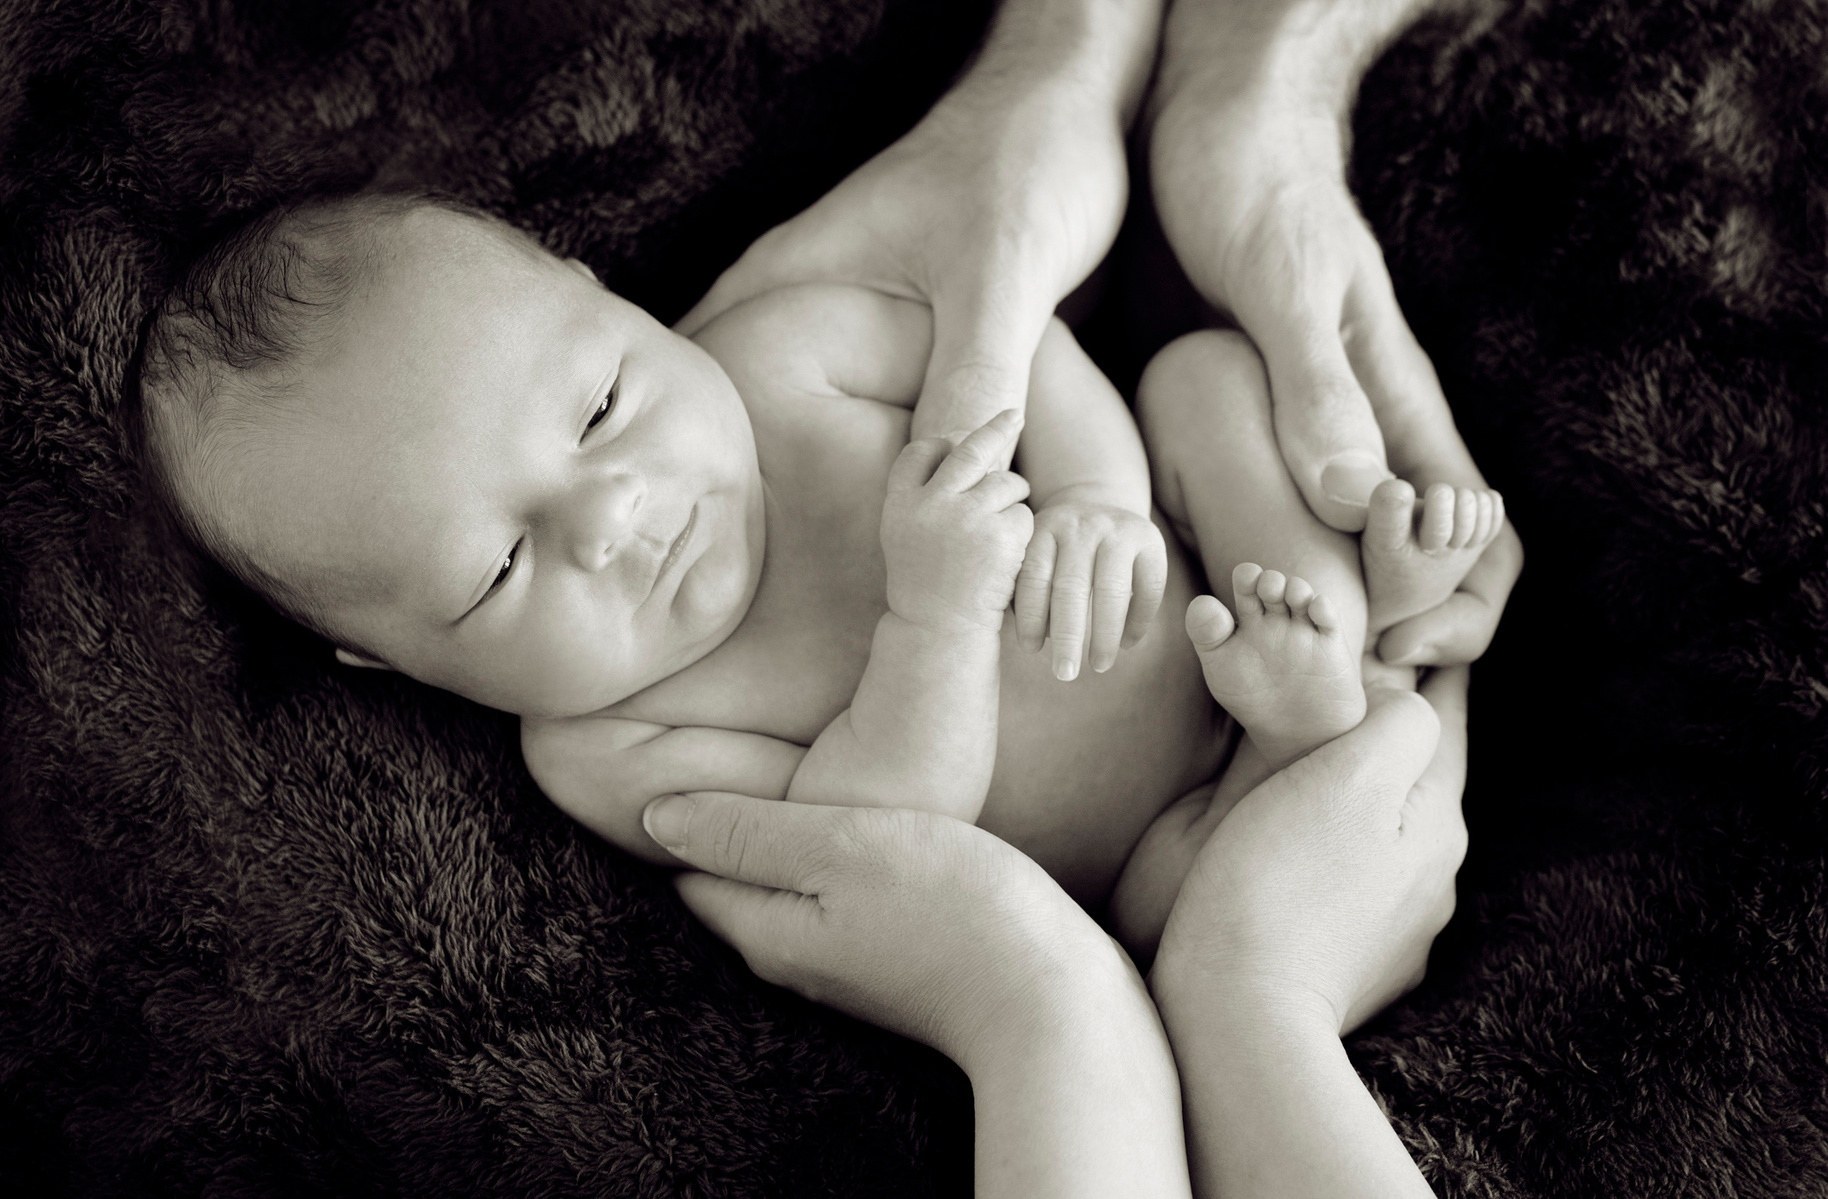 Black and white photograph of newborn baby boy being held in his parent's hands. Shot by photographer Helen Putsman, Geneva's leading family and newborn photographer based in Chêne-Bougeries.